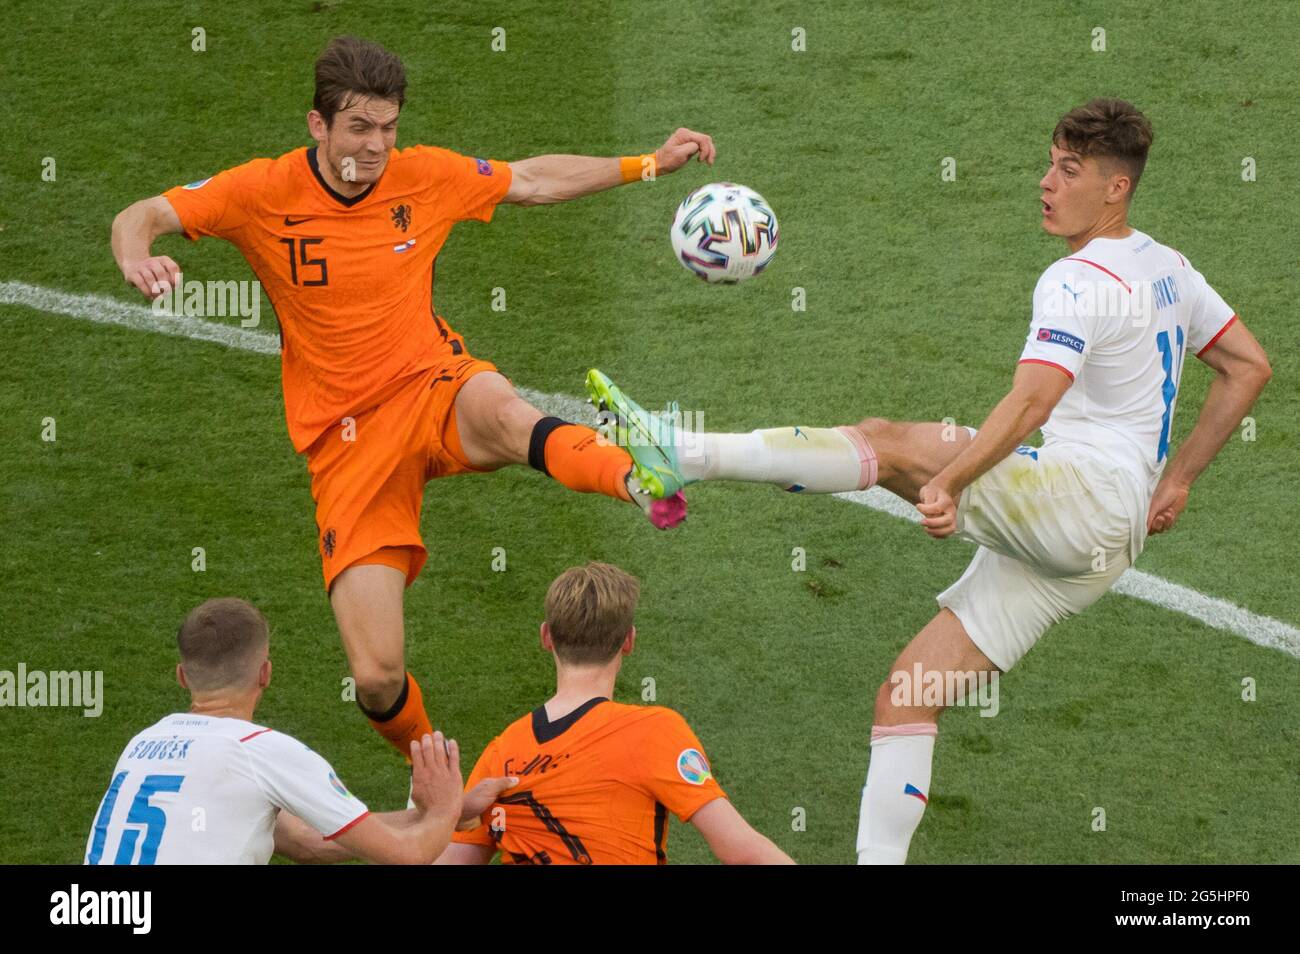 Budapest, Hungary. 27th June, 2021. The Czech Republic's Tomas Soucek (top R) vies with Netherlands' Marten de Roon (top L) during the UEFA Euro 2020 Championship Round of 16 match between the Czech Republic and Netherlands in Budapest, Hungary, on June 27, 2021. Credit: Attila Volgyi/Xinhua/Alamy Live News Stock Photo